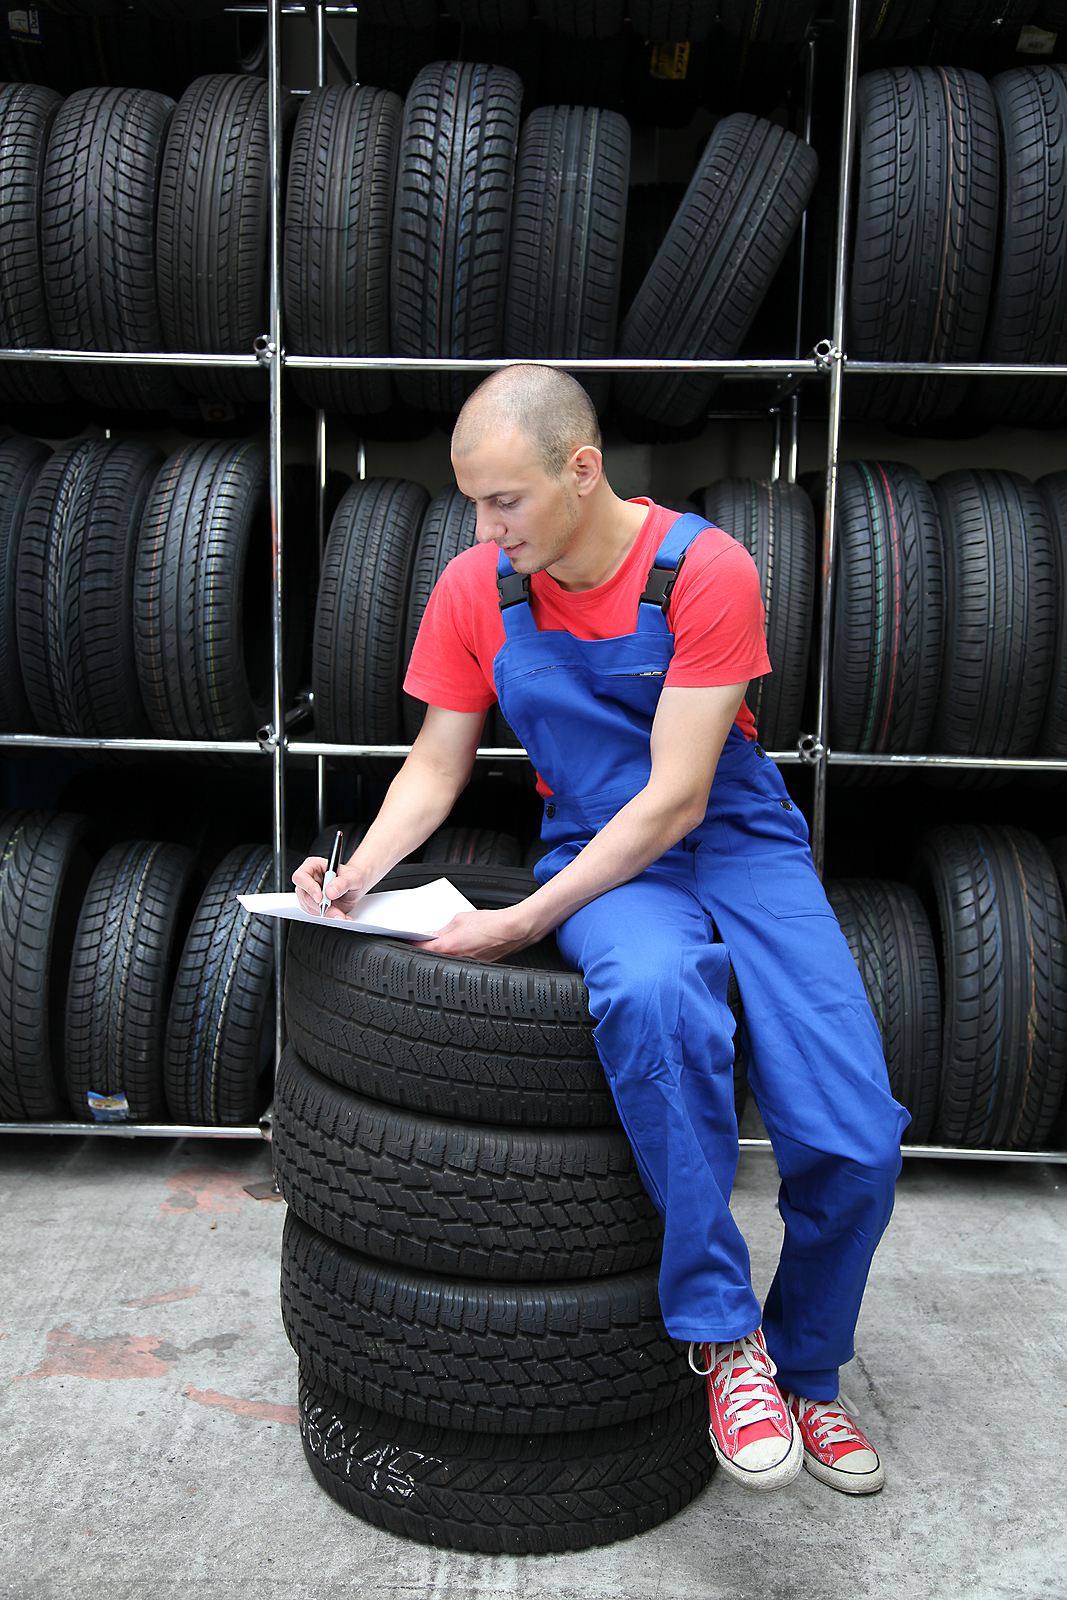 Why You Should Never Mix and Match Your Tires